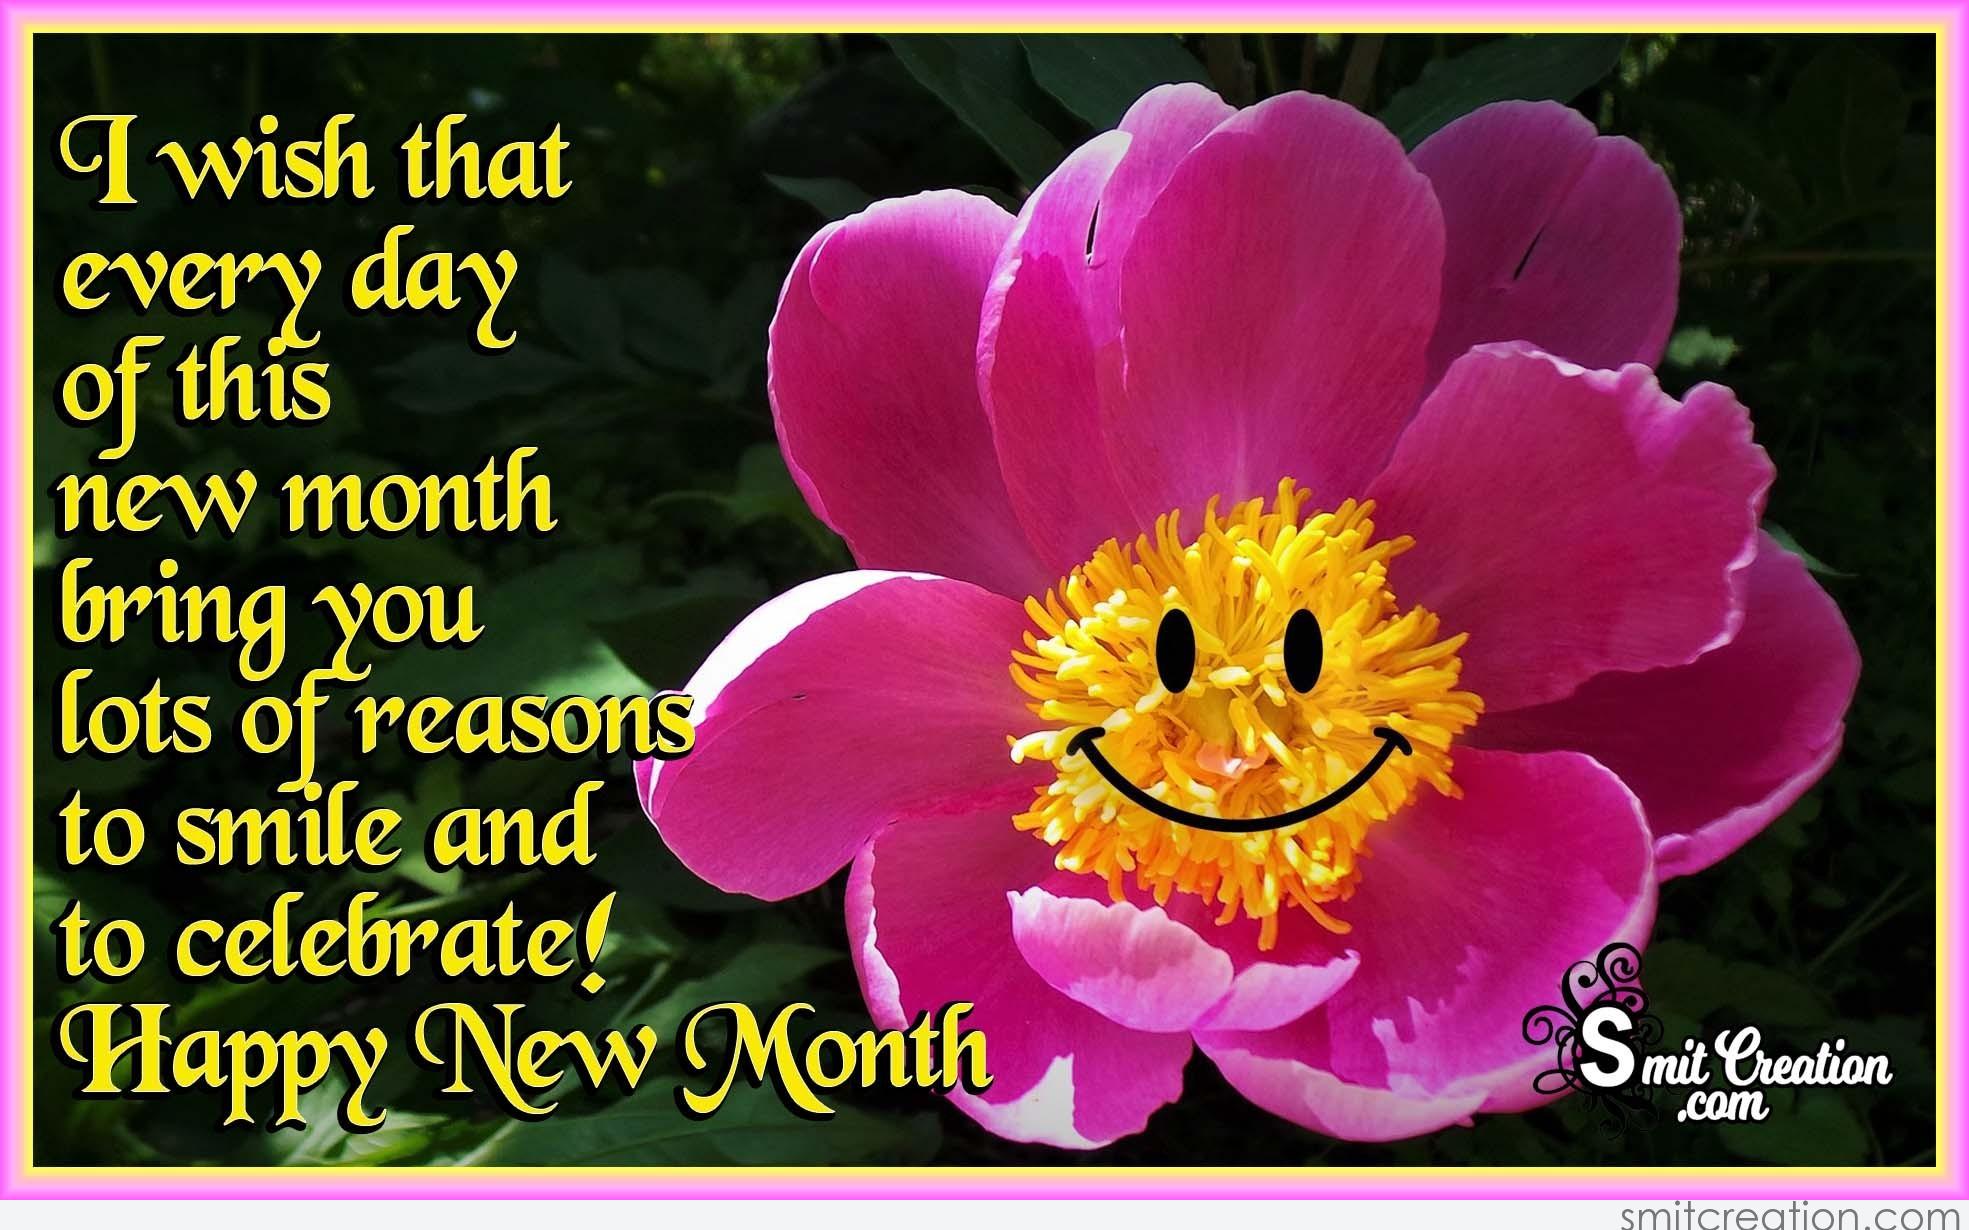 New Month Image, Picture and Graphics